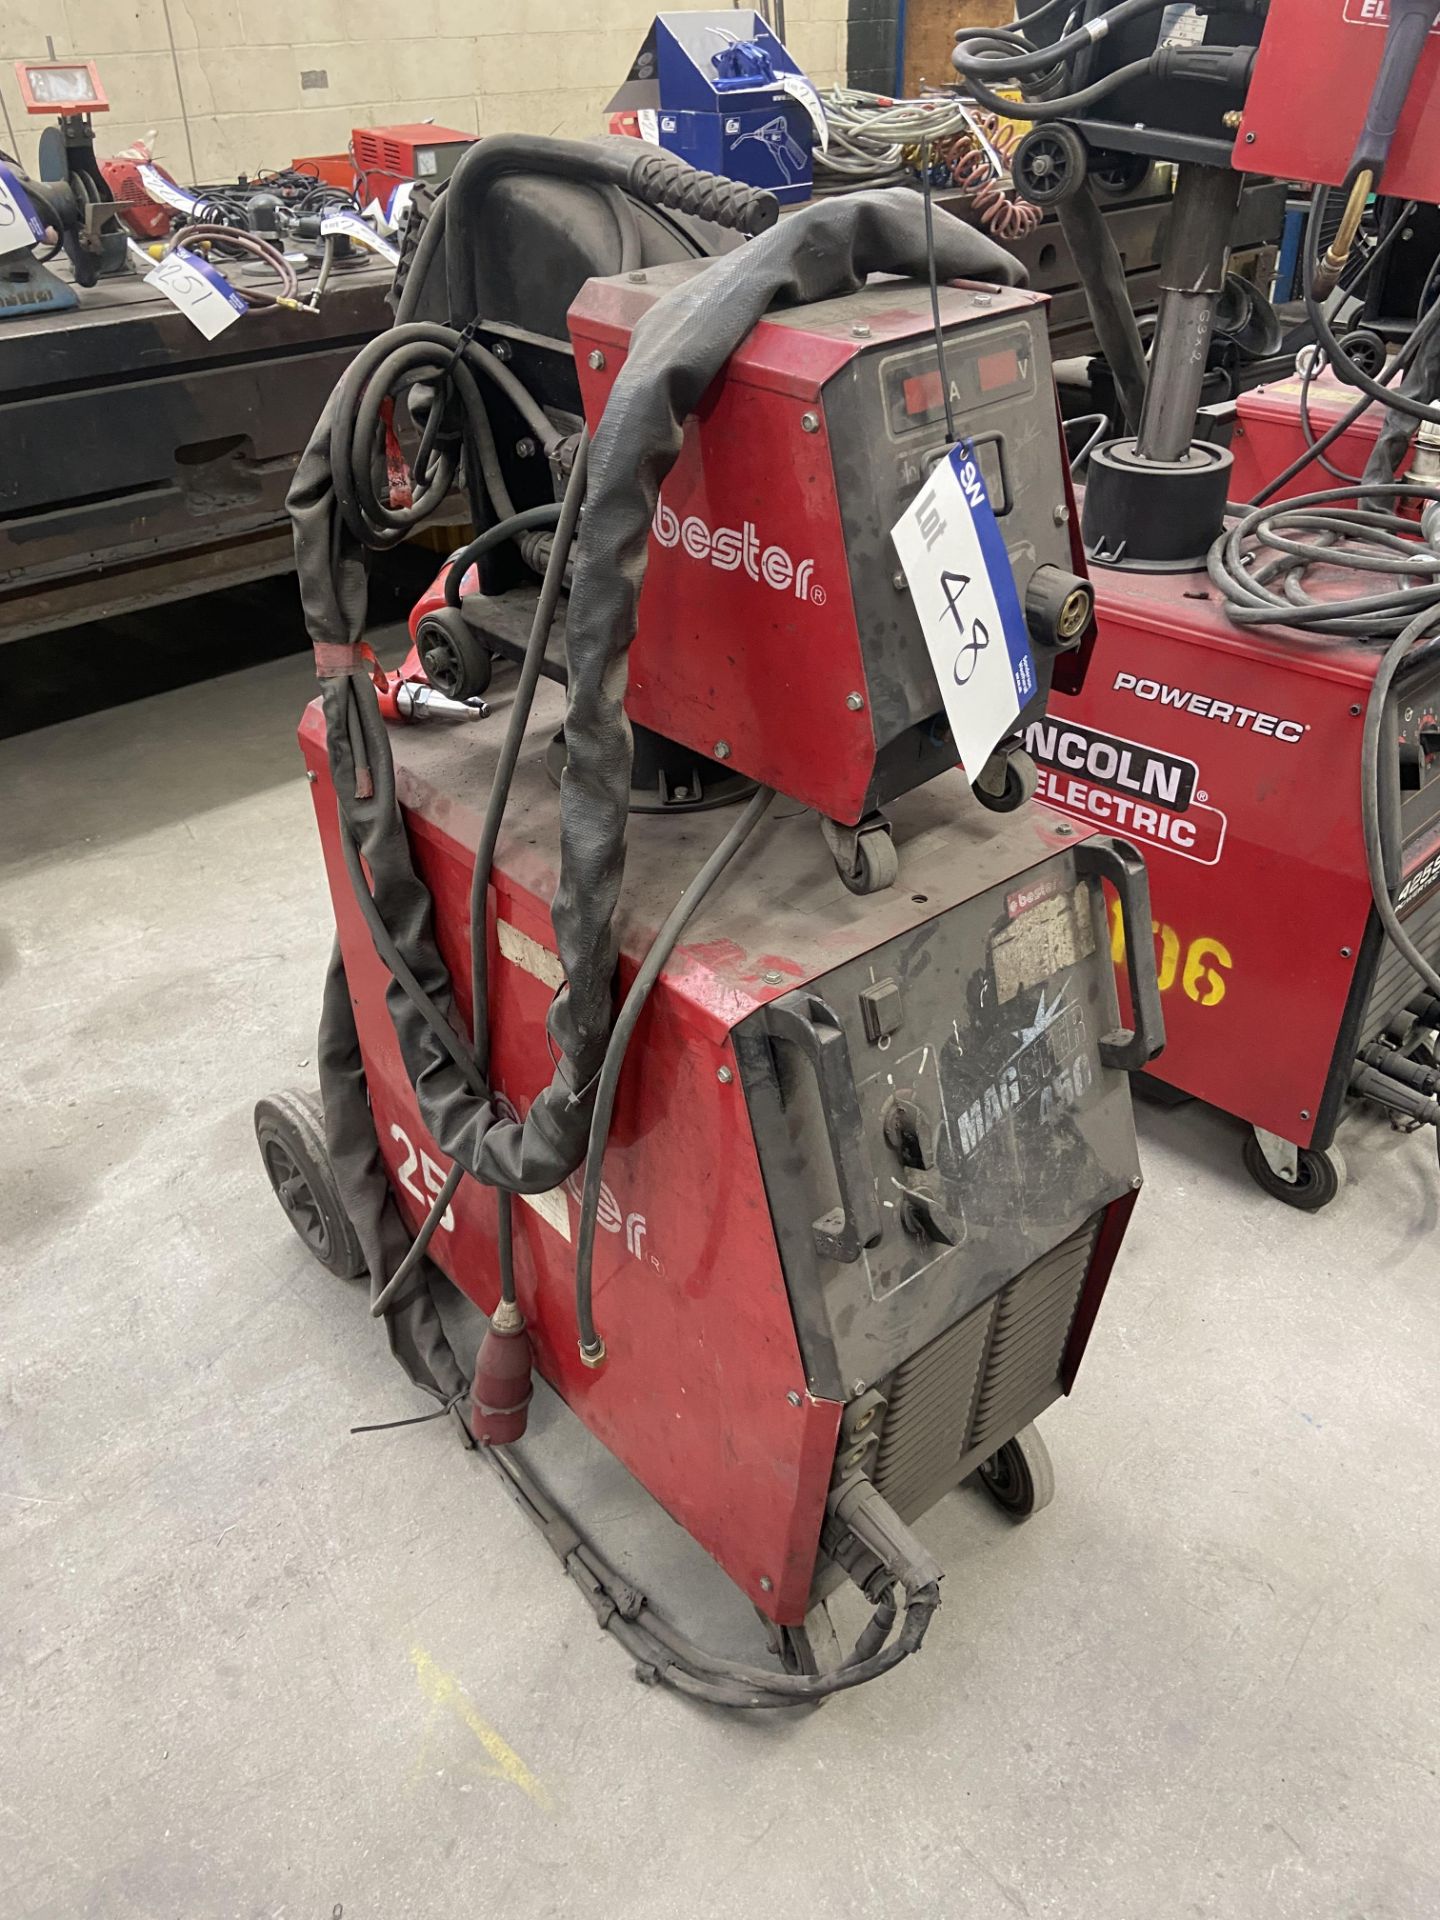 Lincoln Electric Bester Magster 450 Mig Welding Unit, serial no. P1090701224 Please read the